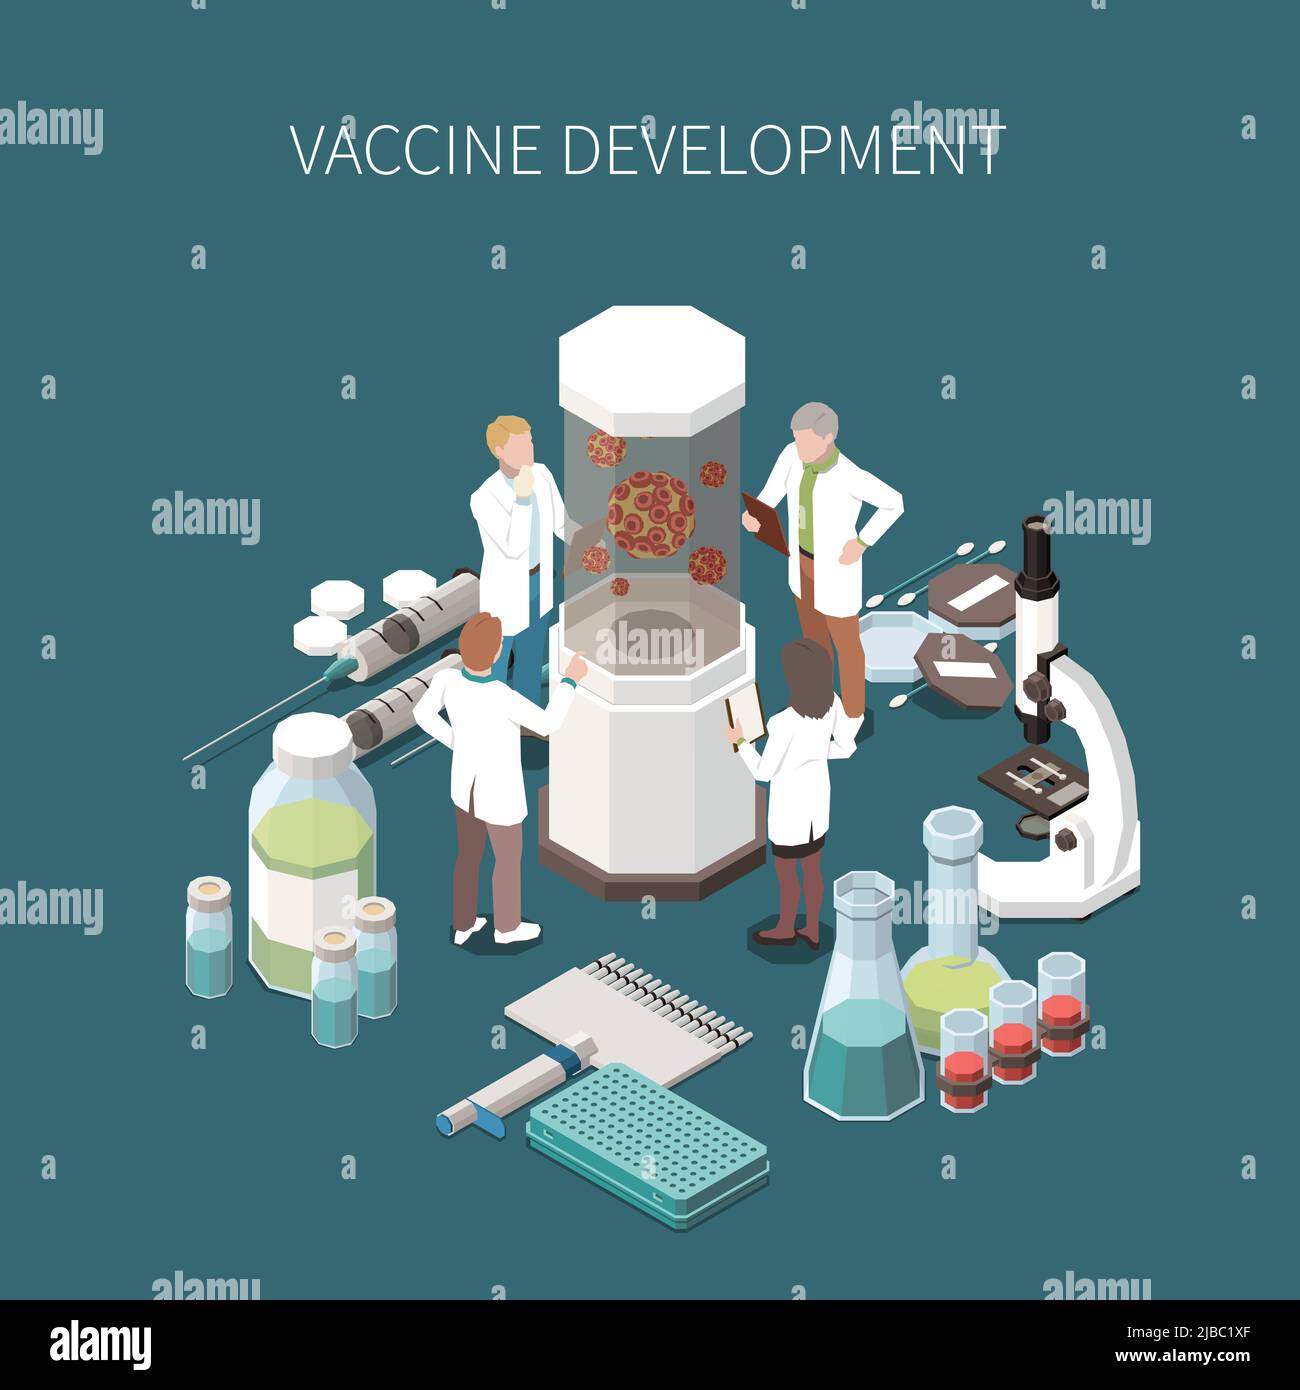 Vaccine development design concept with laboratory equipment for scientific experiments microscope ampoules with vaccine medical syringes isometric ic Stock Vector